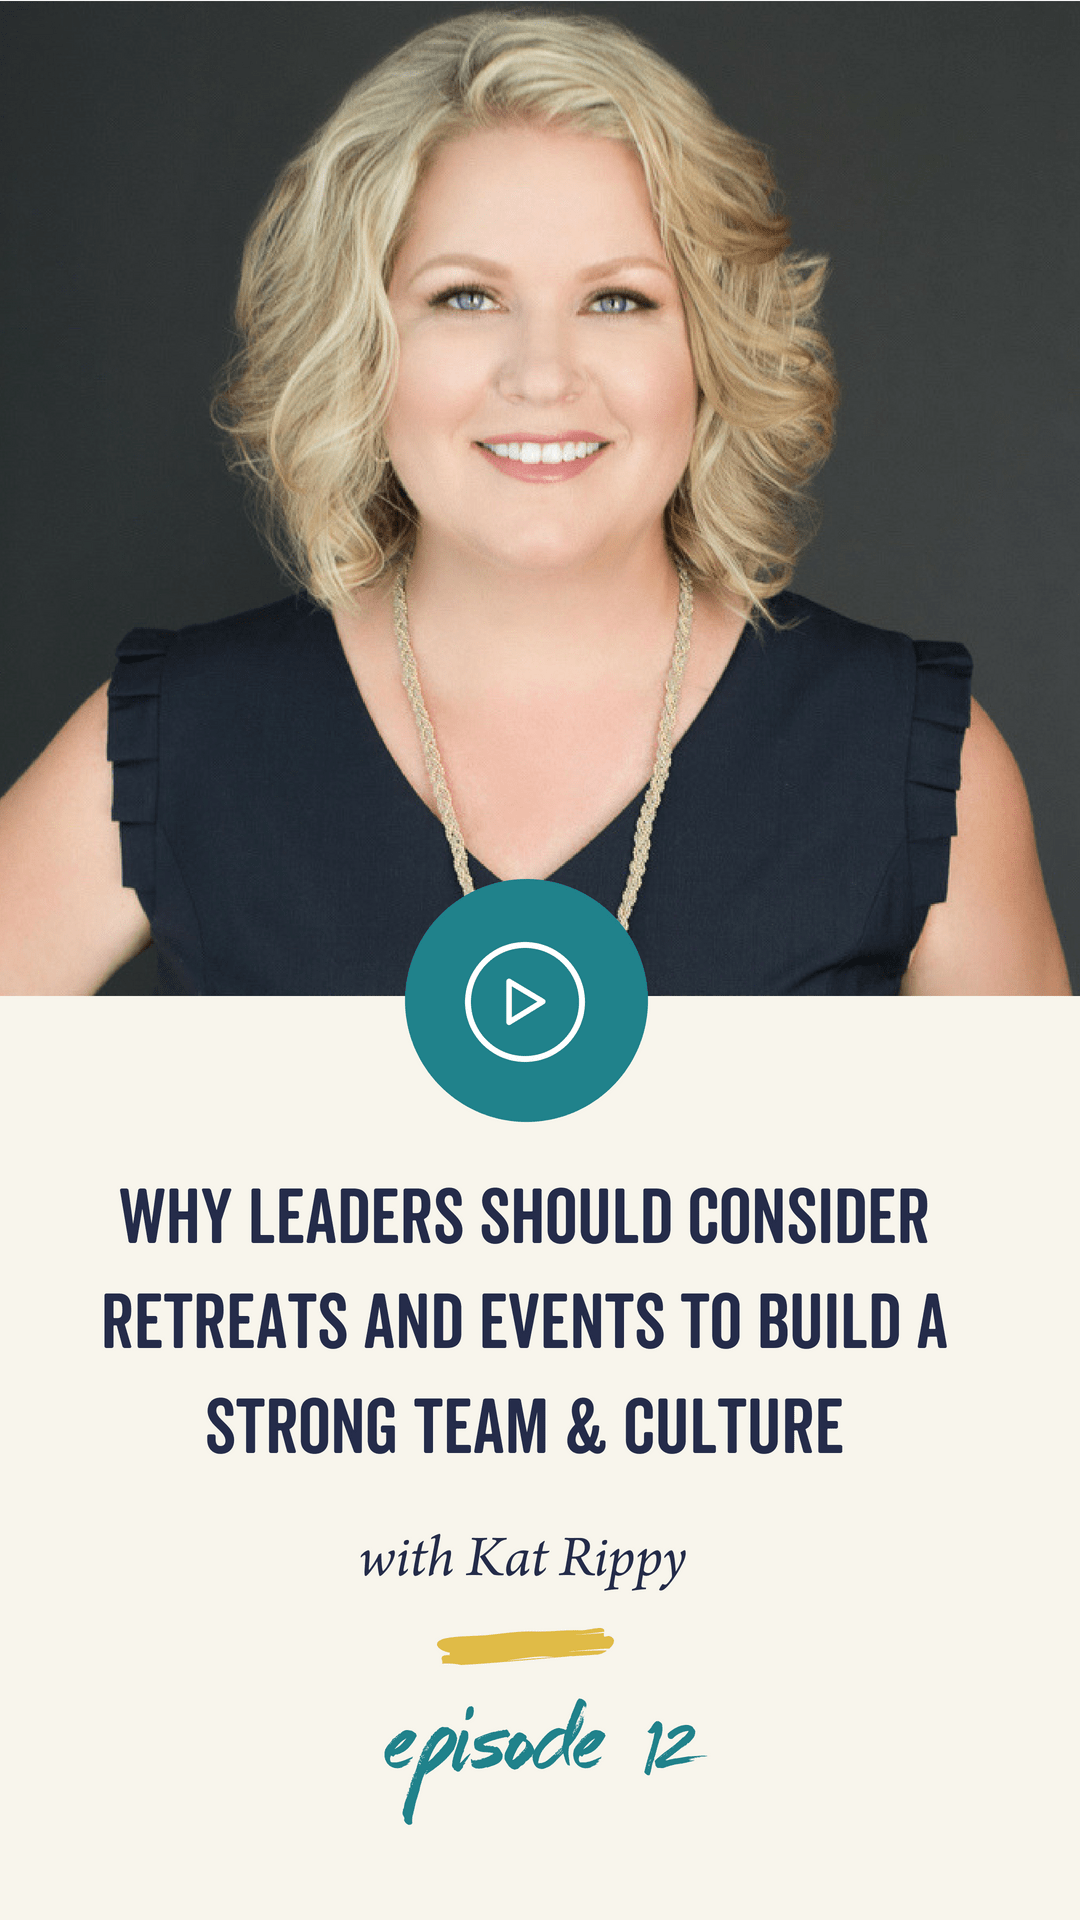 Episode 12: Why Leaders Should Consider Retreats and Events to Build a Strong Team & Culture